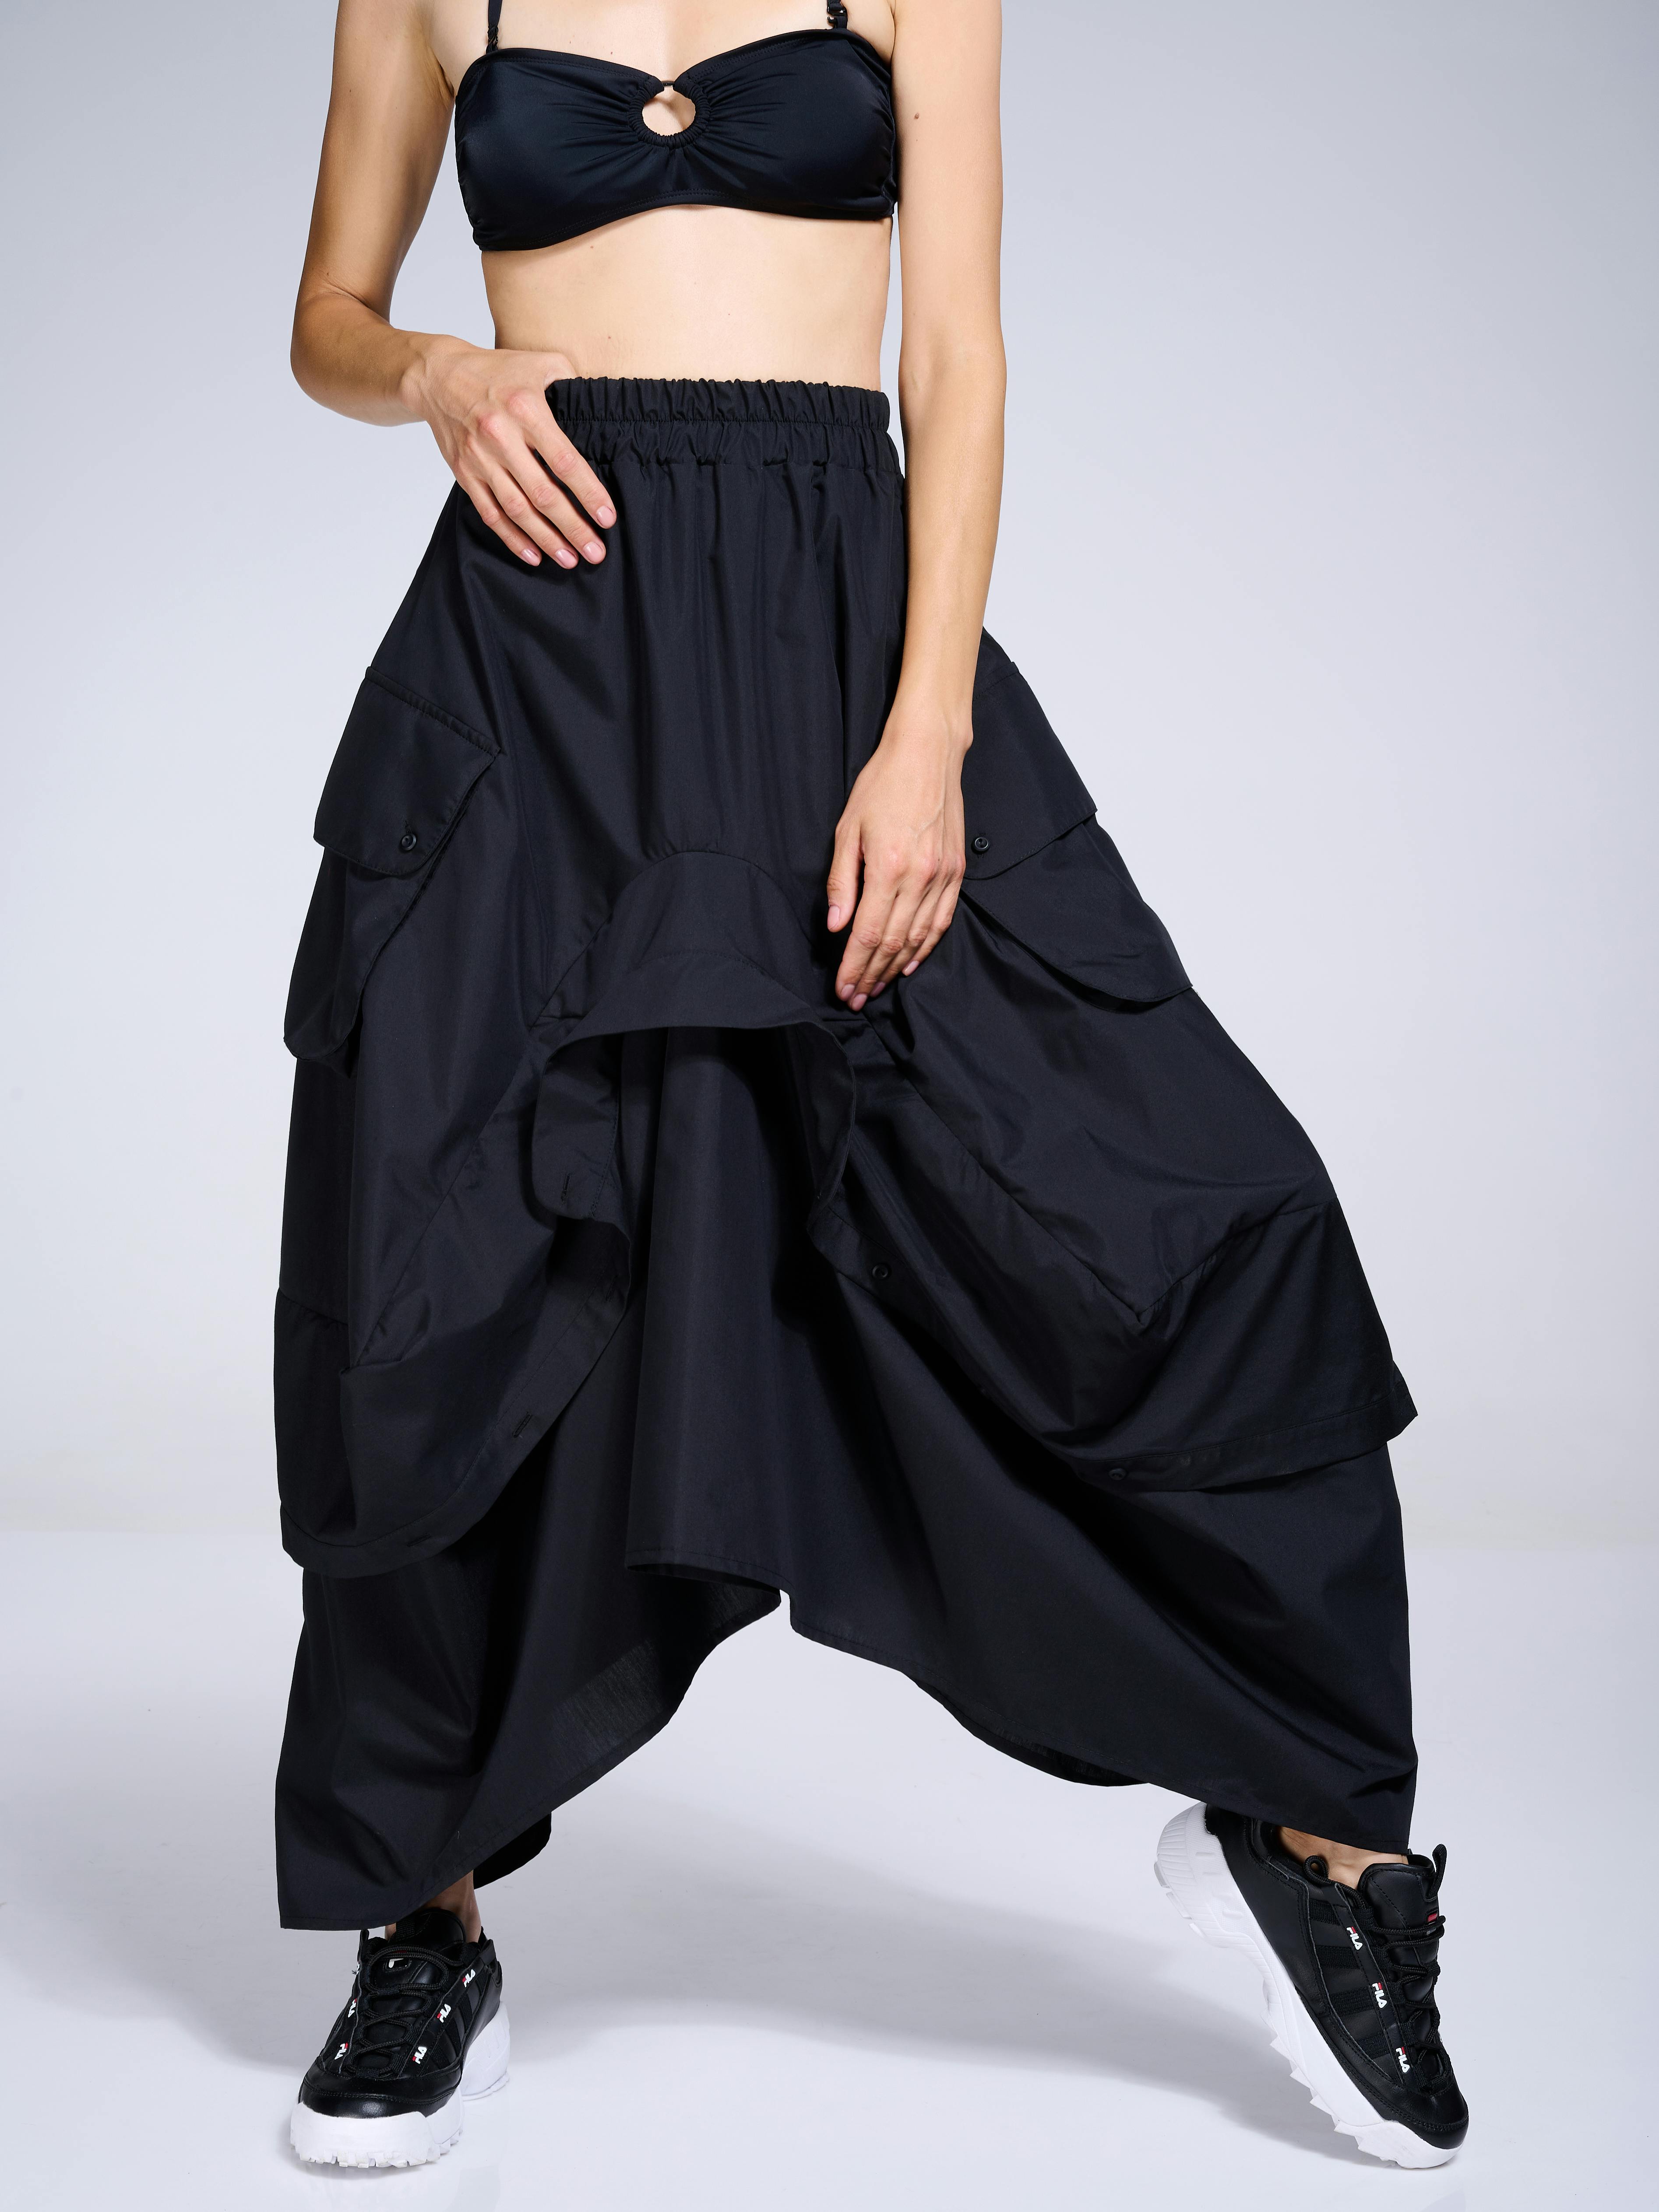 Maxi Skirt With Drapings In Black , a product by METAMORPHOZA